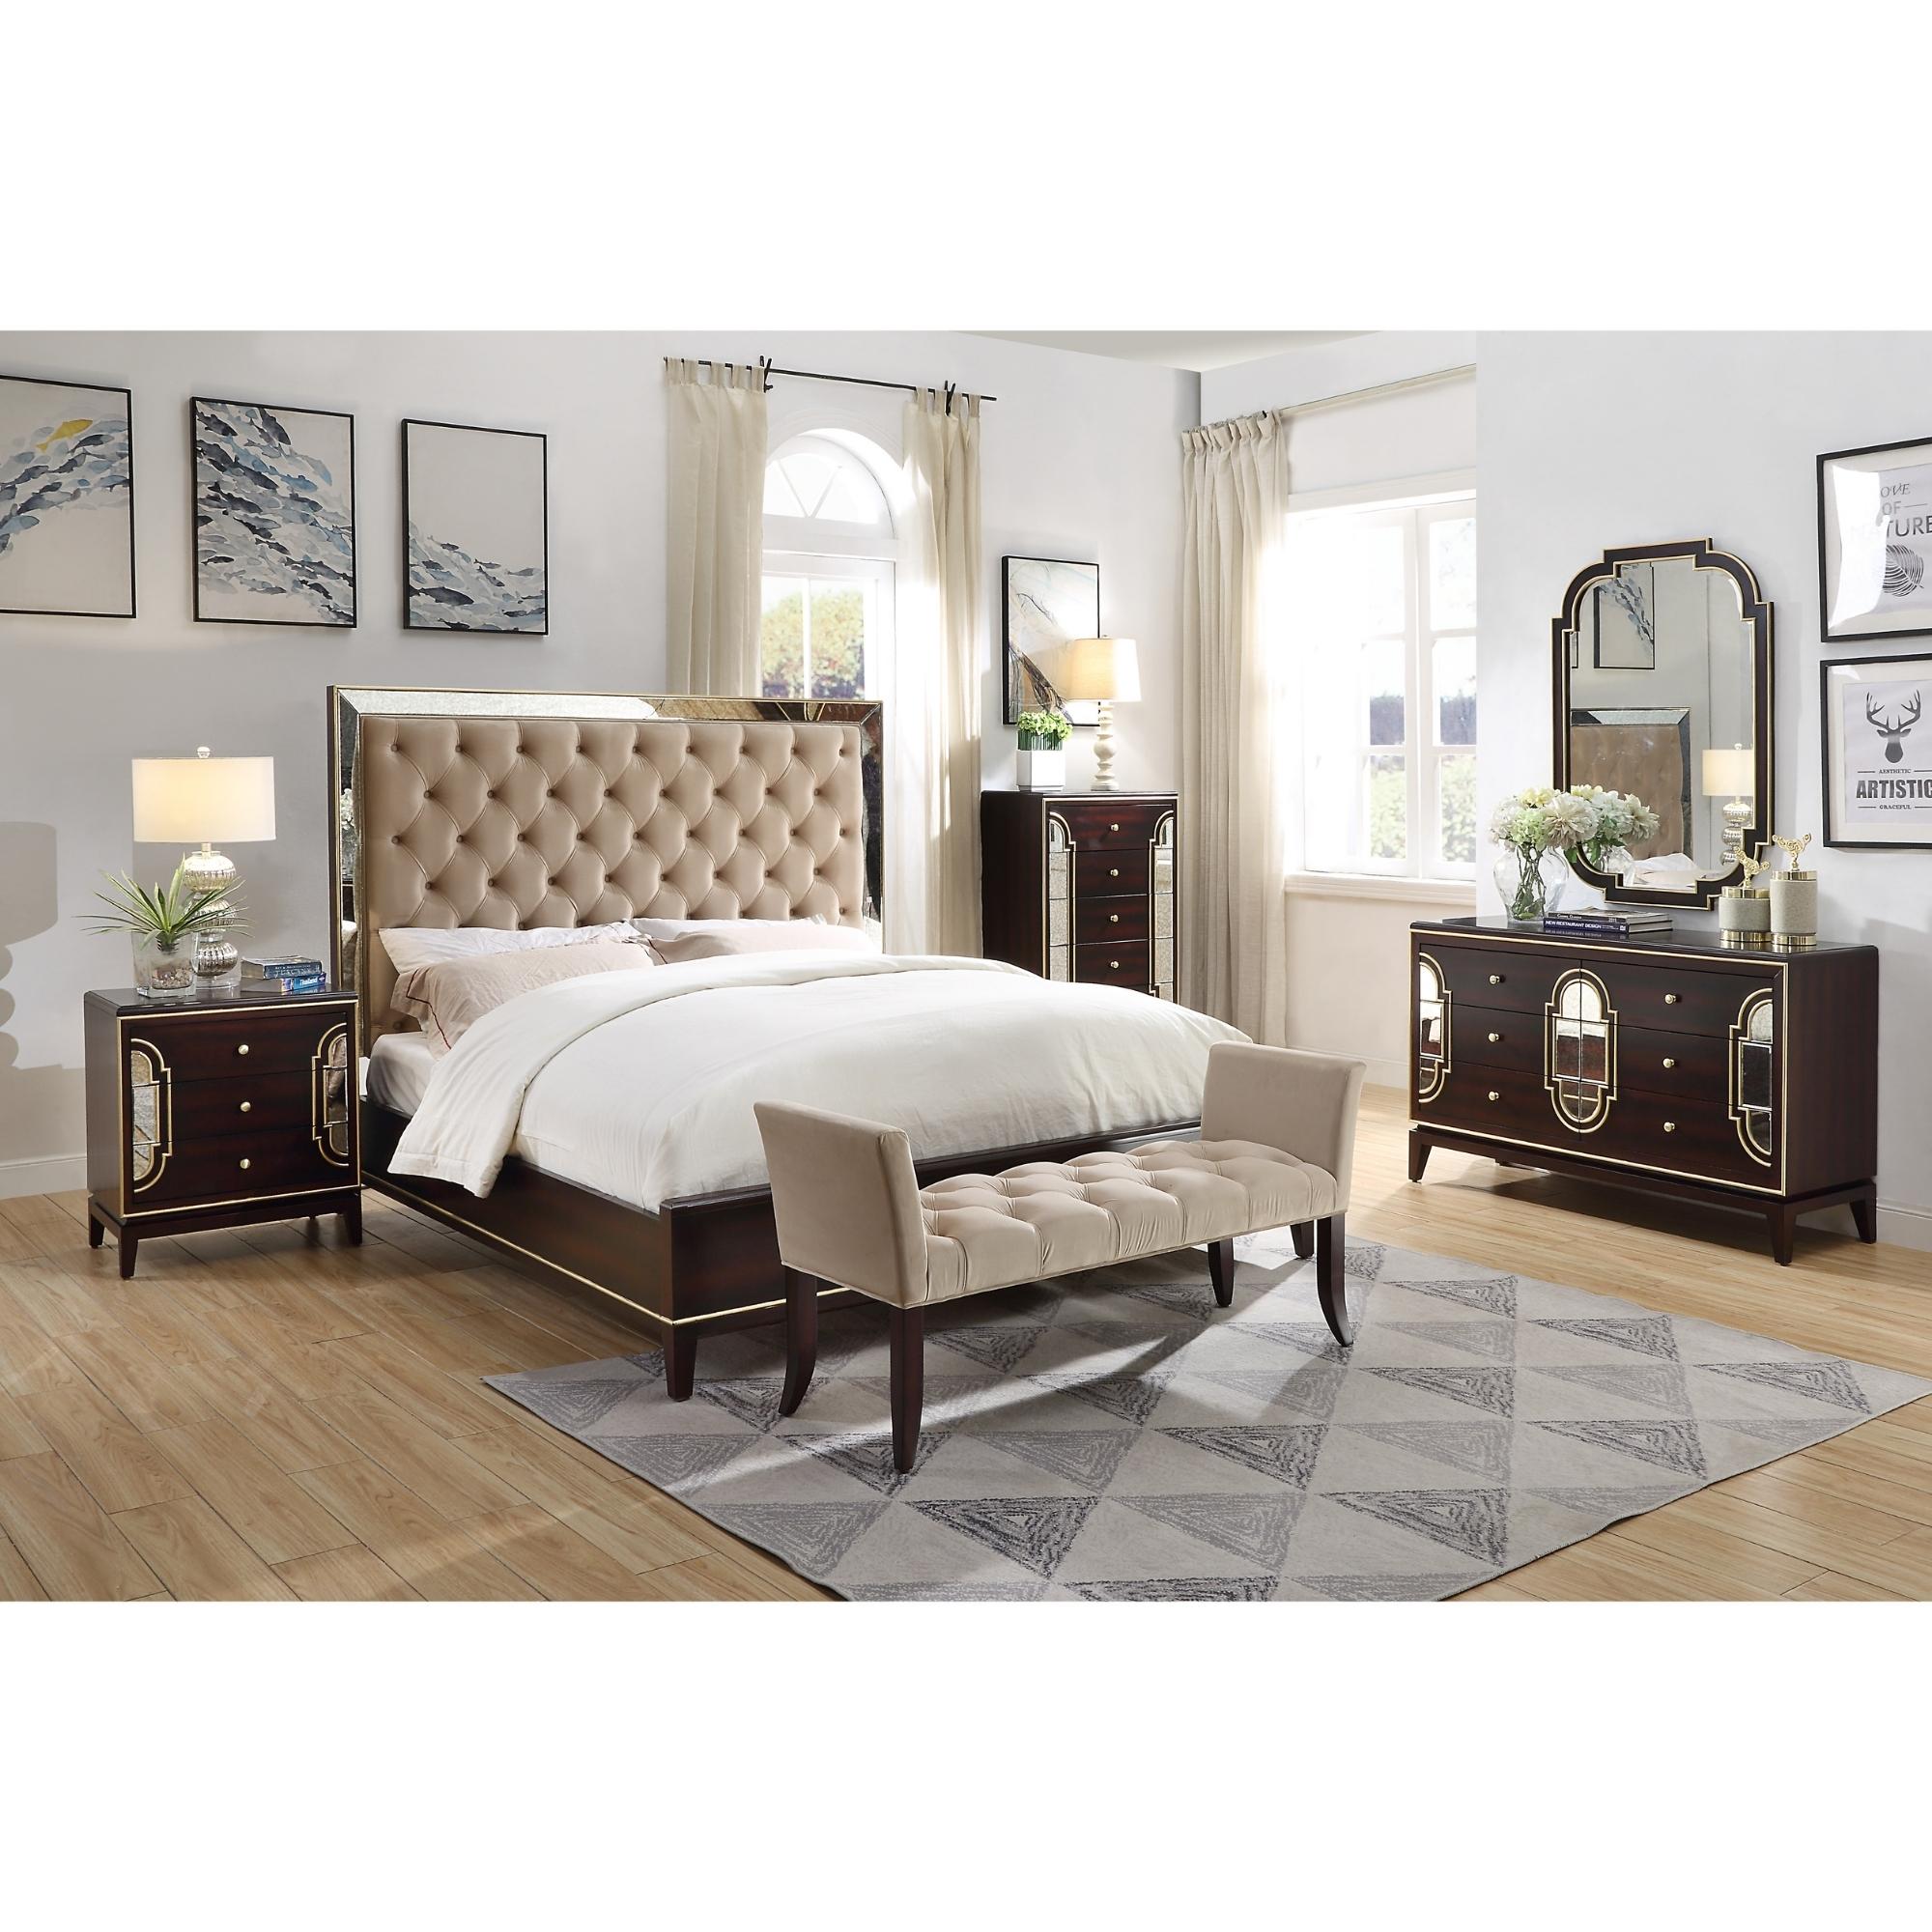 Out of Stock! King Size Bed Frame Antique Look Velvet Fabric With Bedhead